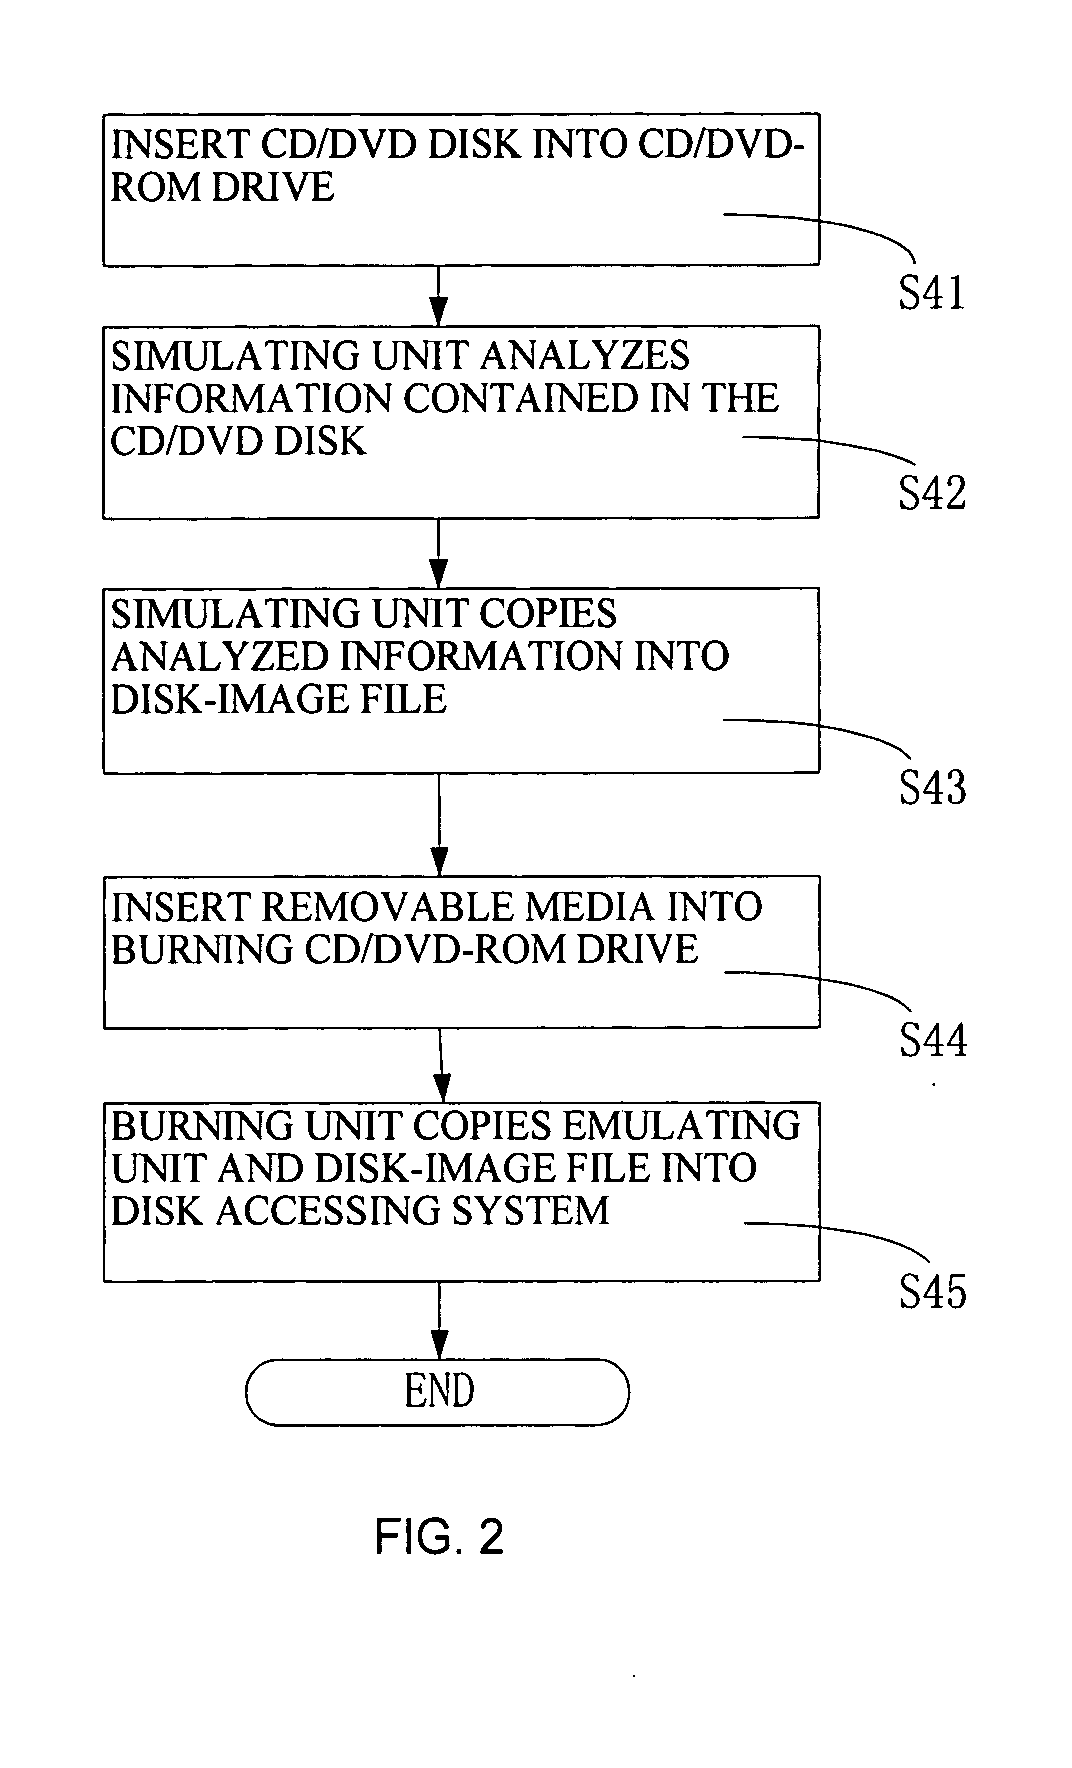 System and method for manipulating and backing up CD/DVD information